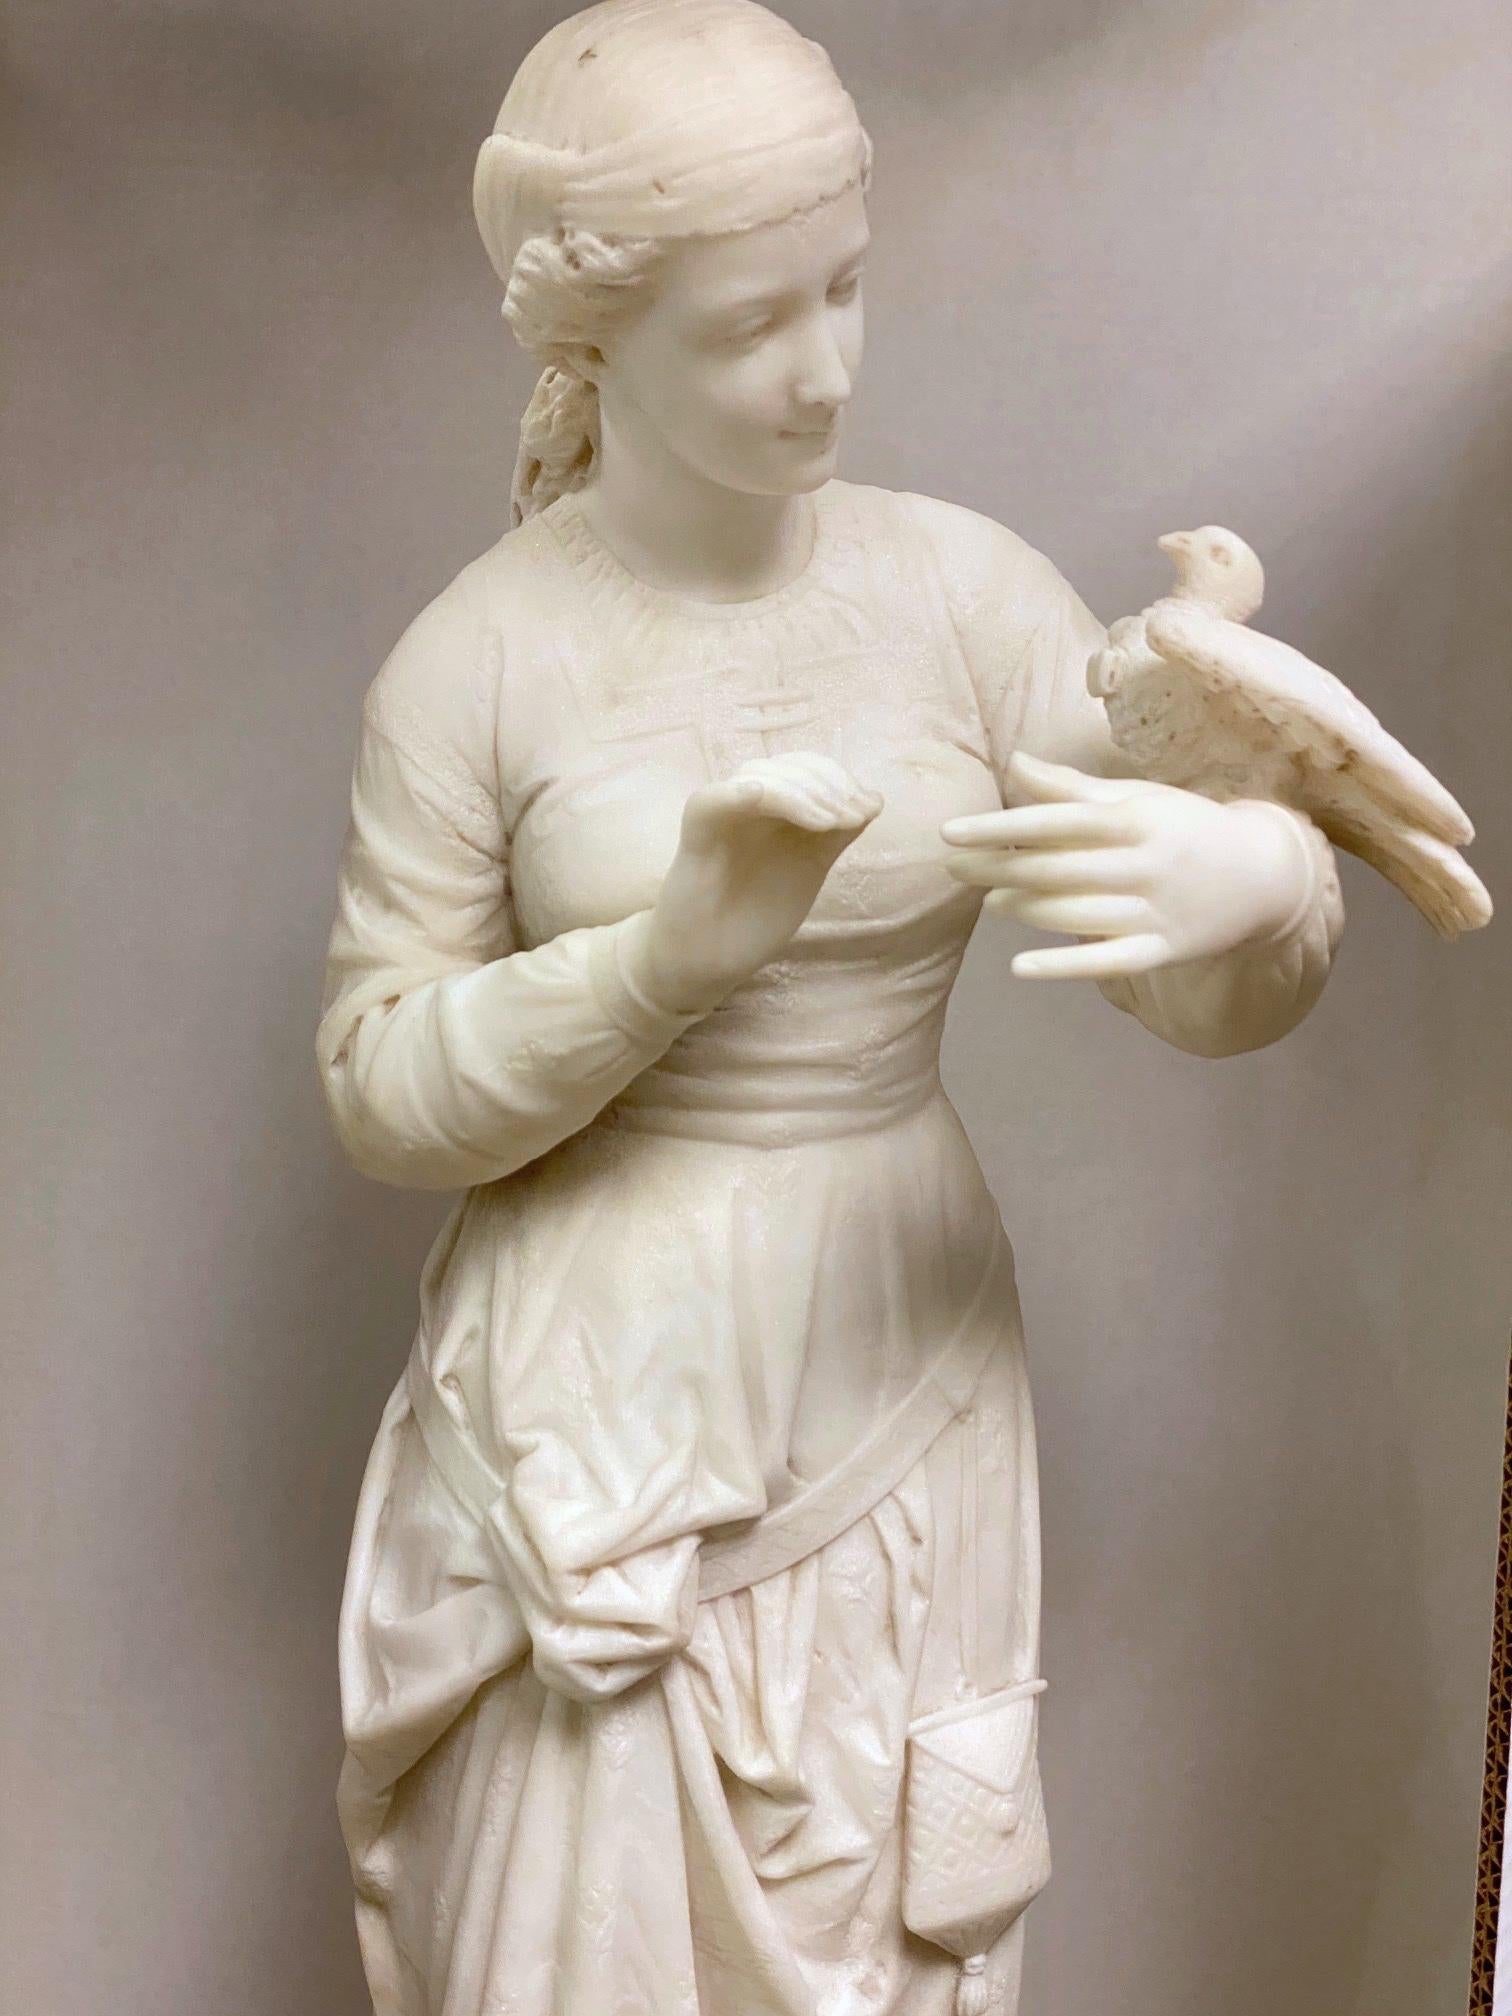 Very finely carved 19th century Italian Renaissance Revival marble statue of a Maiden with a messenger bird on her arms bearing a Love Letter on its neck.
Apparently unsigned but great detailed quality carving and a great subject matter.